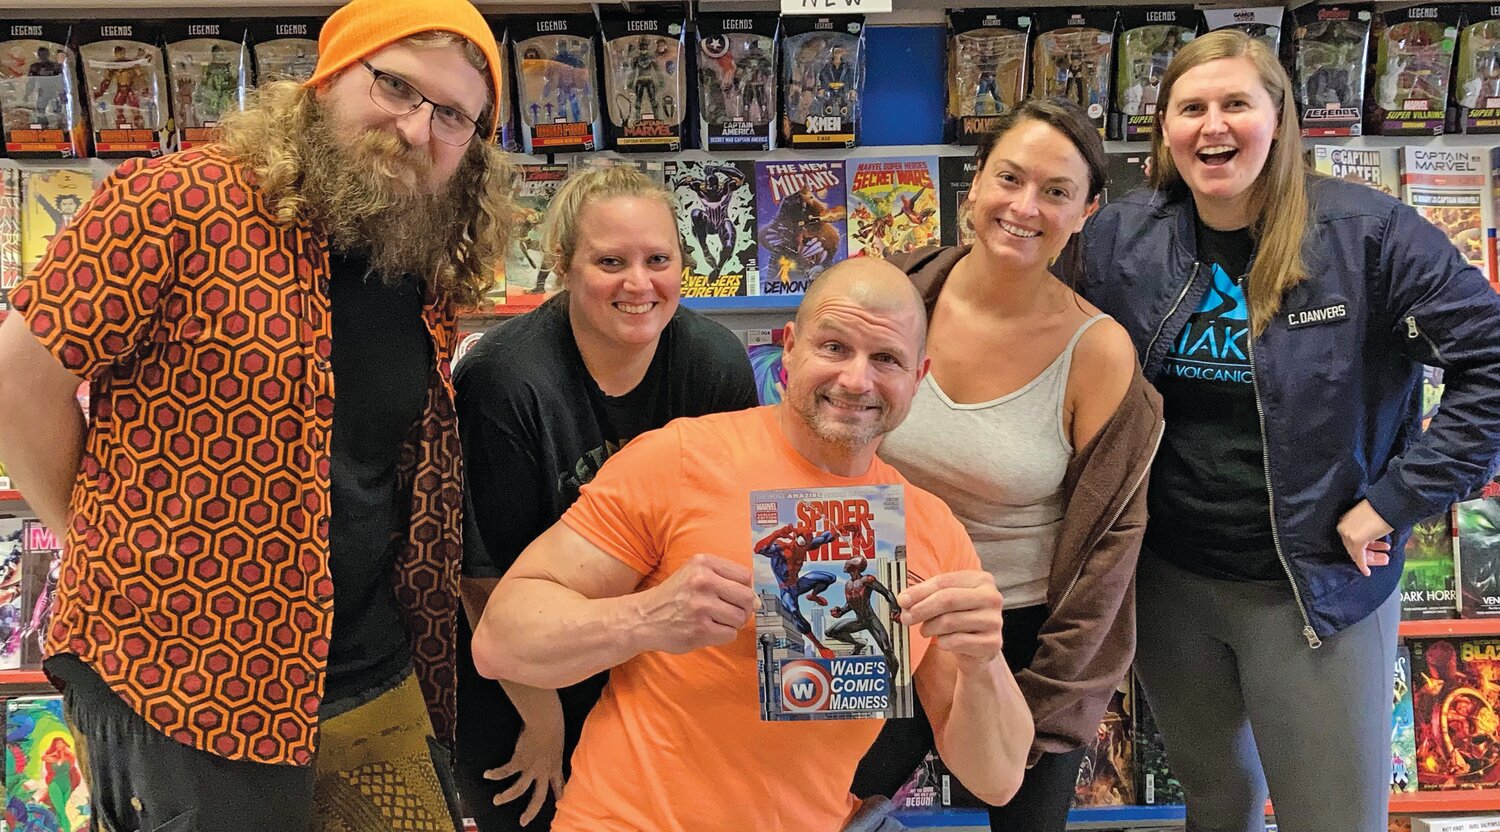 The staff at Wade’s Comic Books of Levittown poses for a photo at its shop.